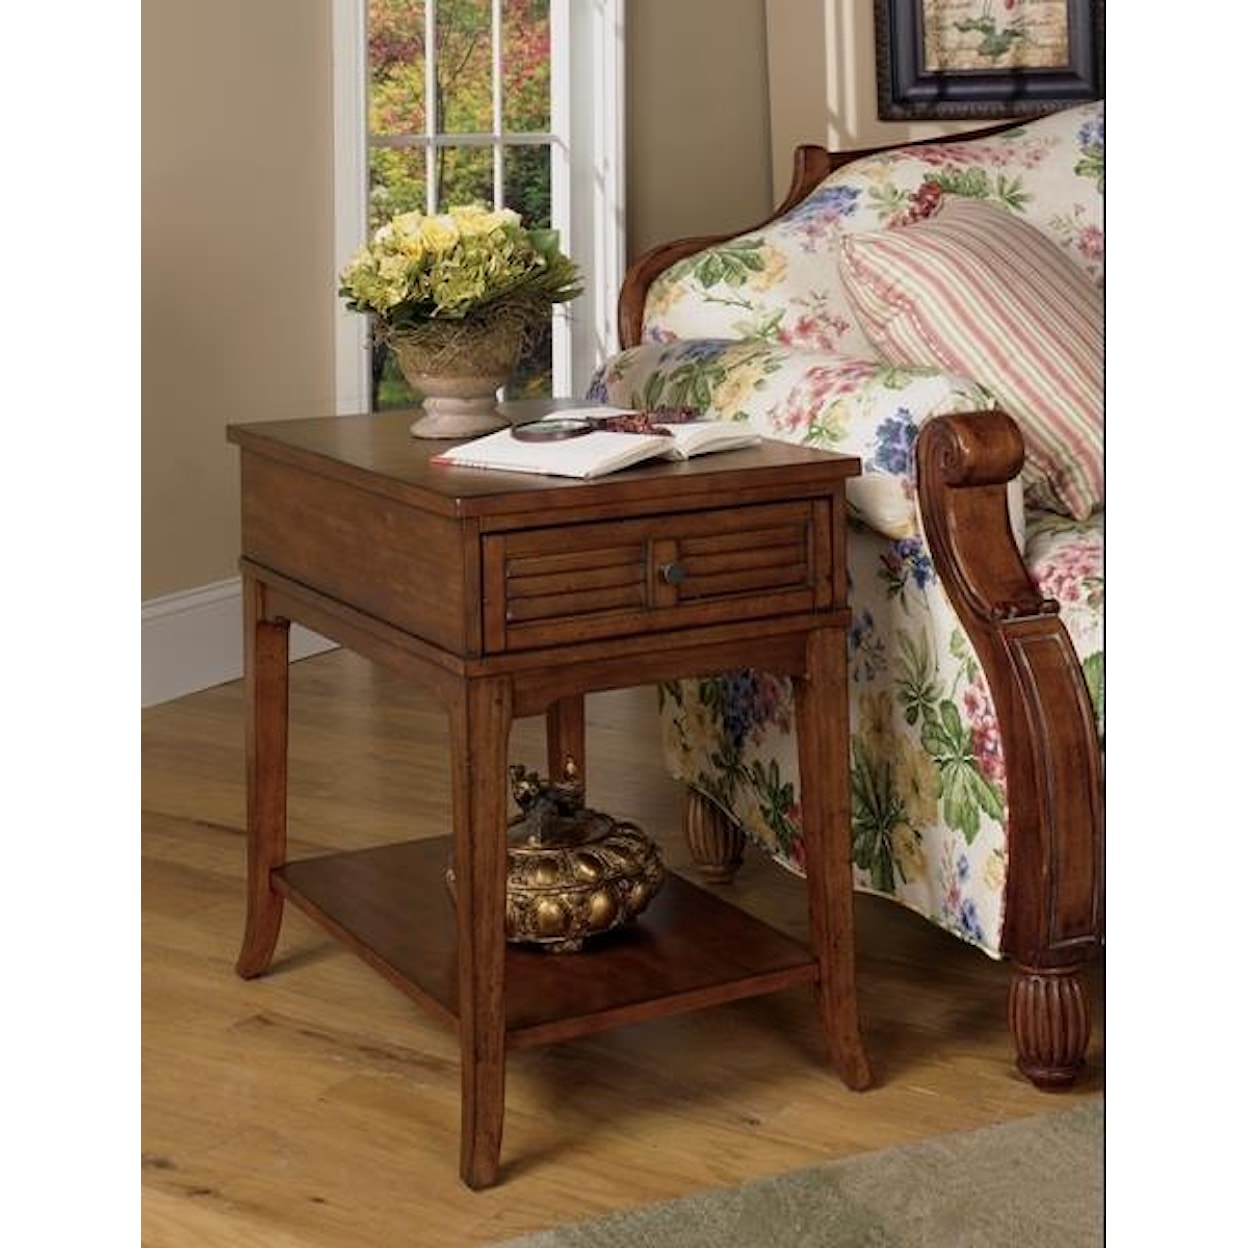 Null Furniture 1013 Rectangular End Table